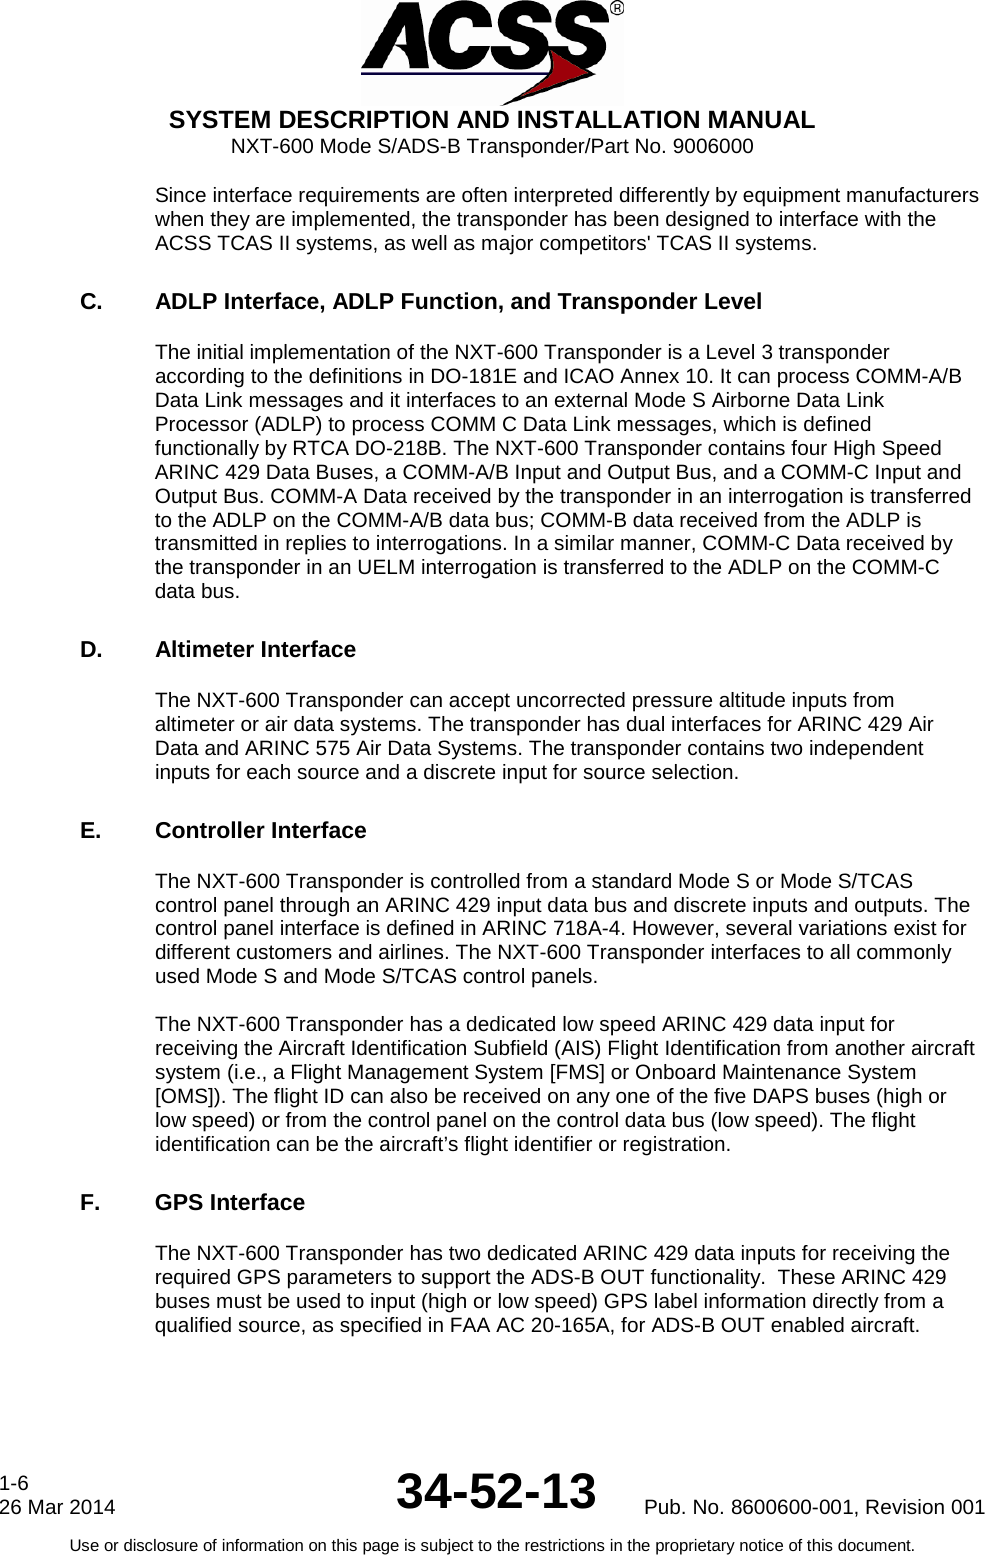  SYSTEM DESCRIPTION AND INSTALLATION MANUAL NXT-600 Mode S/ADS-B Transponder/Part No. 9006000 Since interface requirements are often interpreted differently by equipment manufacturers when they are implemented, the transponder has been designed to interface with the ACSS TCAS II systems, as well as major competitors&apos; TCAS II systems.  C. ADLP Interface, ADLP Function, and Transponder Level  The initial implementation of the NXT-600 Transponder is a Level 3 transponder according to the definitions in DO-181E and ICAO Annex 10. It can process COMM-A/B Data Link messages and it interfaces to an external Mode S Airborne Data Link Processor (ADLP) to process COMM C Data Link messages, which is defined functionally by RTCA DO-218B. The NXT-600 Transponder contains four High Speed ARINC 429 Data Buses, a COMM-A/B Input and Output Bus, and a COMM-C Input and Output Bus. COMM-A Data received by the transponder in an interrogation is transferred to the ADLP on the COMM-A/B data bus; COMM-B data received from the ADLP is transmitted in replies to interrogations. In a similar manner, COMM-C Data received by the transponder in an UELM interrogation is transferred to the ADLP on the COMM-C data bus.  D. Altimeter Interface  The NXT-600 Transponder can accept uncorrected pressure altitude inputs from altimeter or air data systems. The transponder has dual interfaces for ARINC 429 Air Data and ARINC 575 Air Data Systems. The transponder contains two independent inputs for each source and a discrete input for source selection.  E. Controller Interface  The NXT-600 Transponder is controlled from a standard Mode S or Mode S/TCAS control panel through an ARINC 429 input data bus and discrete inputs and outputs. The control panel interface is defined in ARINC 718A-4. However, several variations exist for different customers and airlines. The NXT-600 Transponder interfaces to all commonly used Mode S and Mode S/TCAS control panels.   The NXT-600 Transponder has a dedicated low speed ARINC 429 data input for receiving the Aircraft Identification Subfield (AIS) Flight Identification from another aircraft system (i.e., a Flight Management System [FMS] or Onboard Maintenance System [OMS]). The flight ID can also be received on any one of the five DAPS buses (high or low speed) or from the control panel on the control data bus (low speed). The flight identification can be the aircraft’s flight identifier or registration.  F. GPS Interface The NXT-600 Transponder has two dedicated ARINC 429 data inputs for receiving the required GPS parameters to support the ADS-B OUT functionality.  These ARINC 429 buses must be used to input (high or low speed) GPS label information directly from a qualified source, as specified in FAA AC 20-165A, for ADS-B OUT enabled aircraft.  1-6 26 Mar 2014 34-52-13 Pub. No. 8600600-001, Revision 001 Use or disclosure of information on this page is subject to the restrictions in the proprietary notice of this document.  